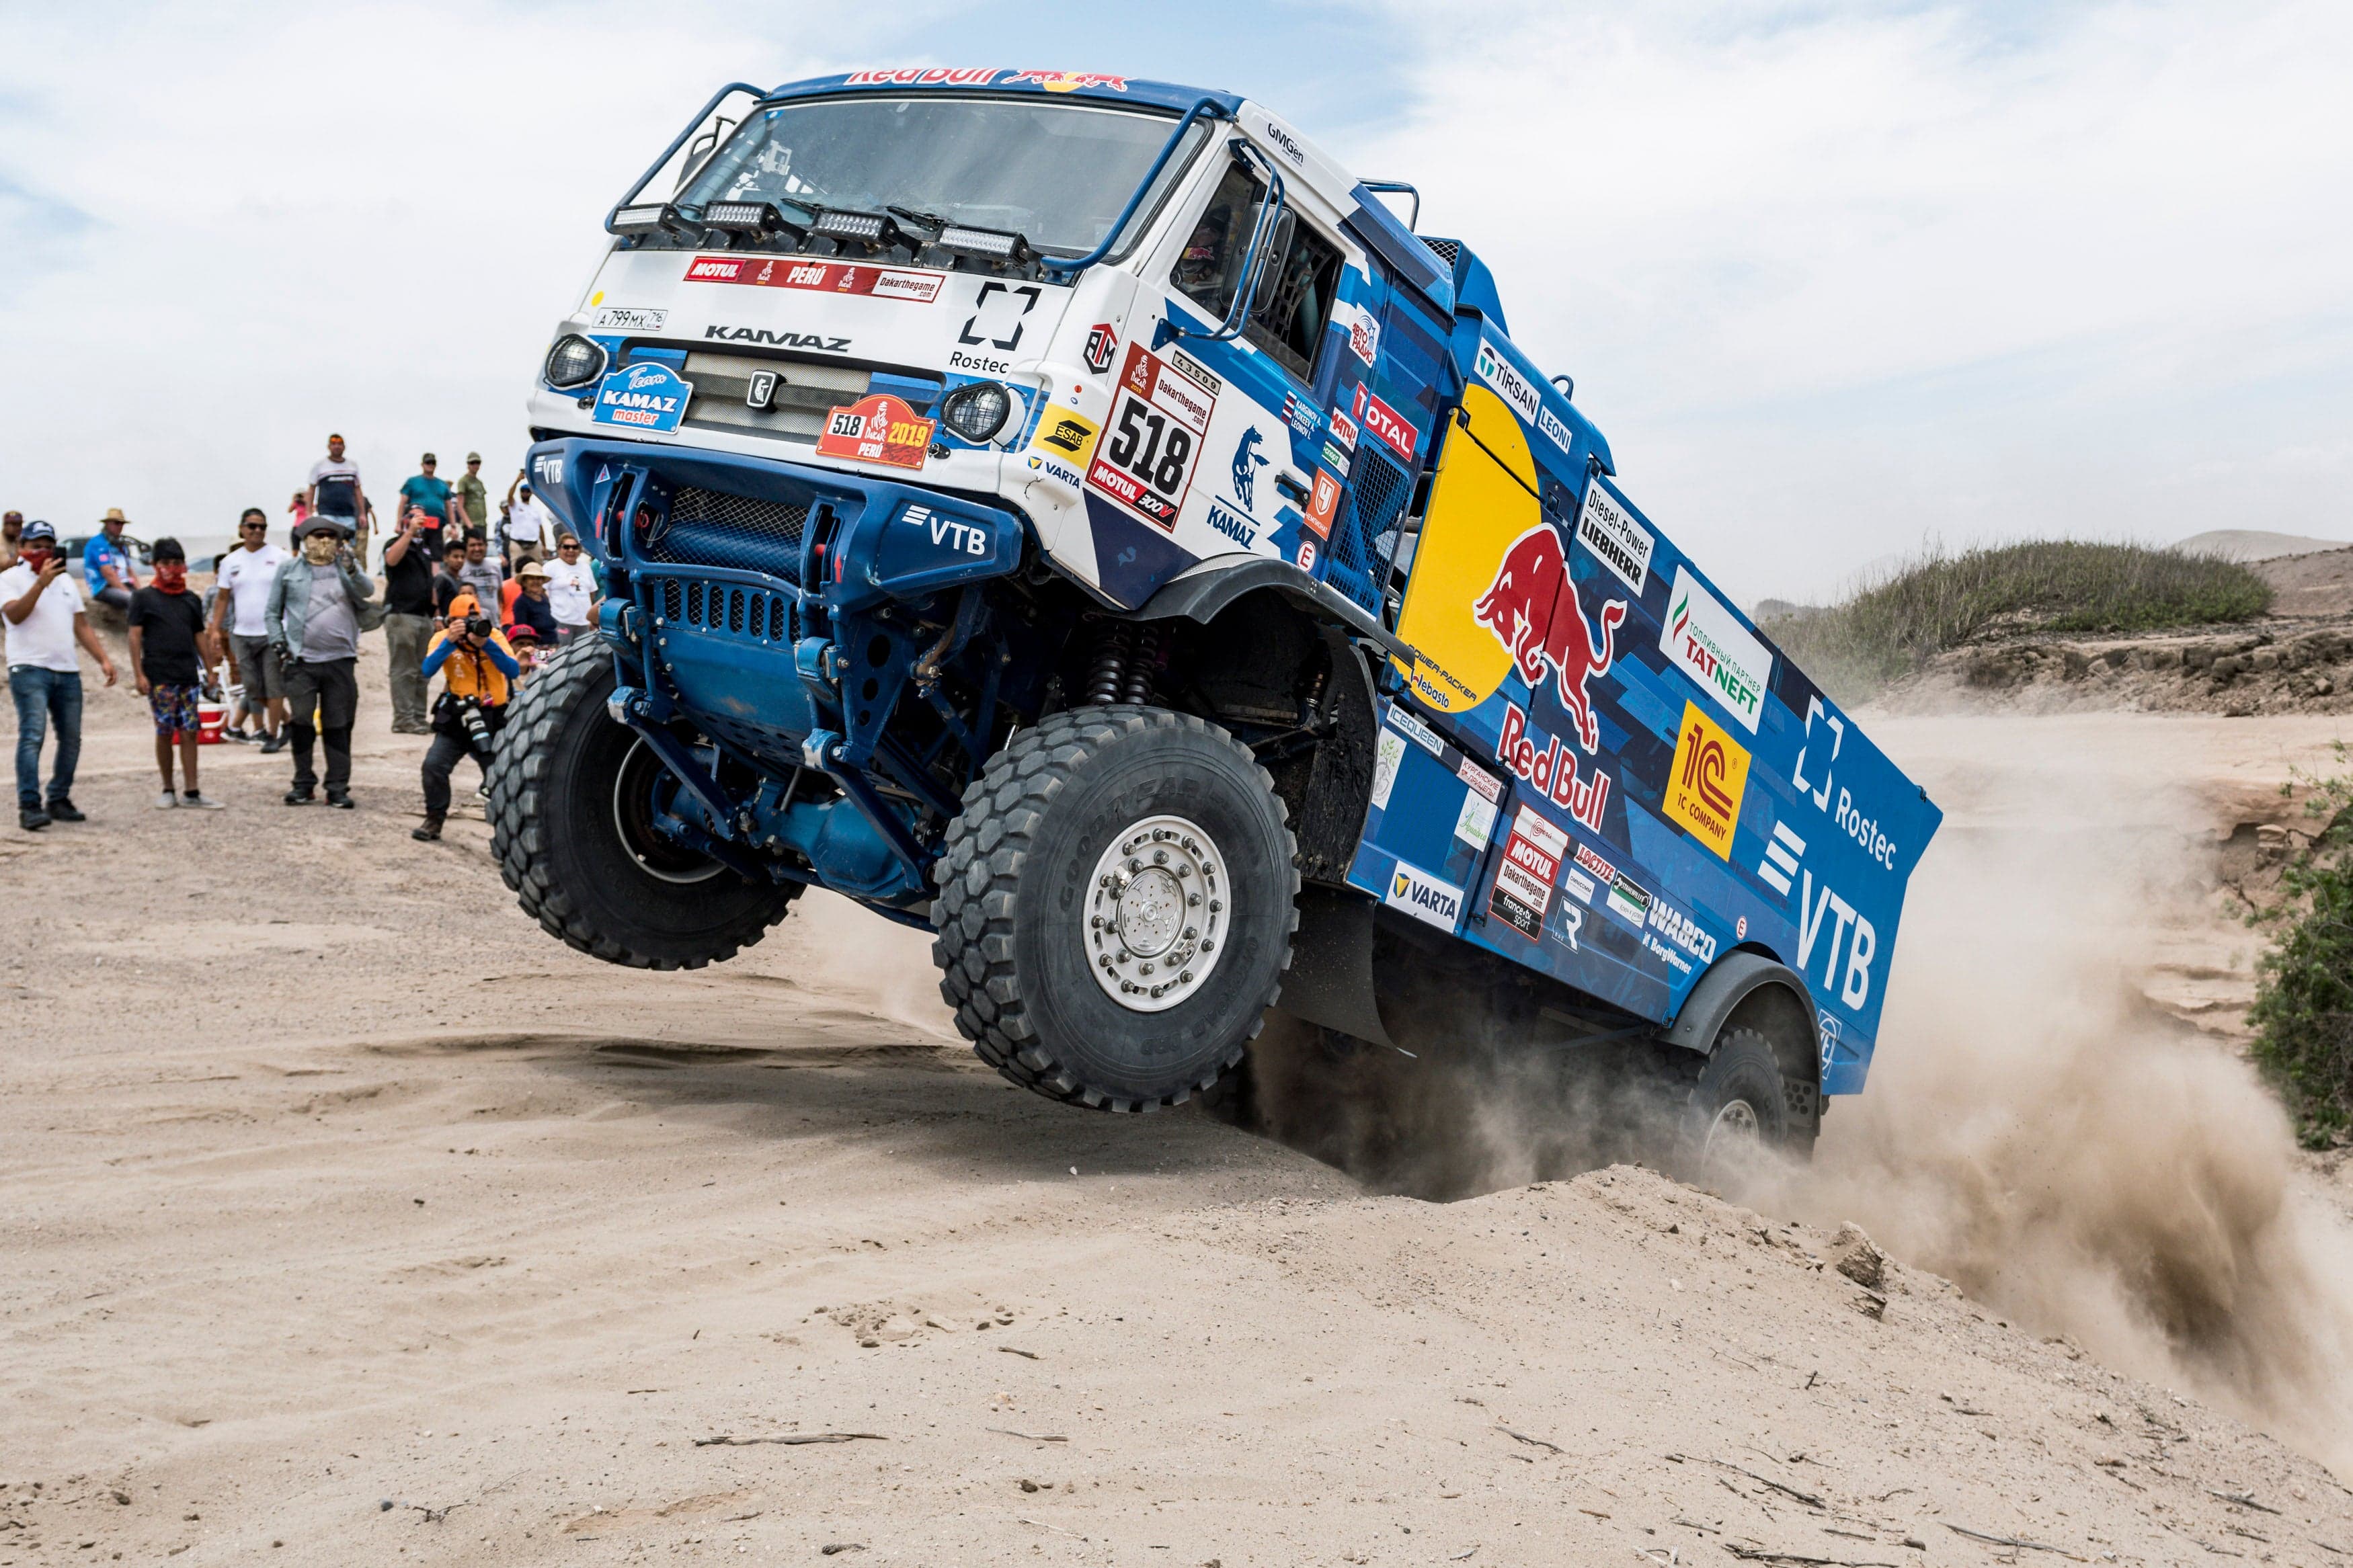 Dakar Truck Driver Disqualified After Injuring Spectator in Bizarre Blind Collision